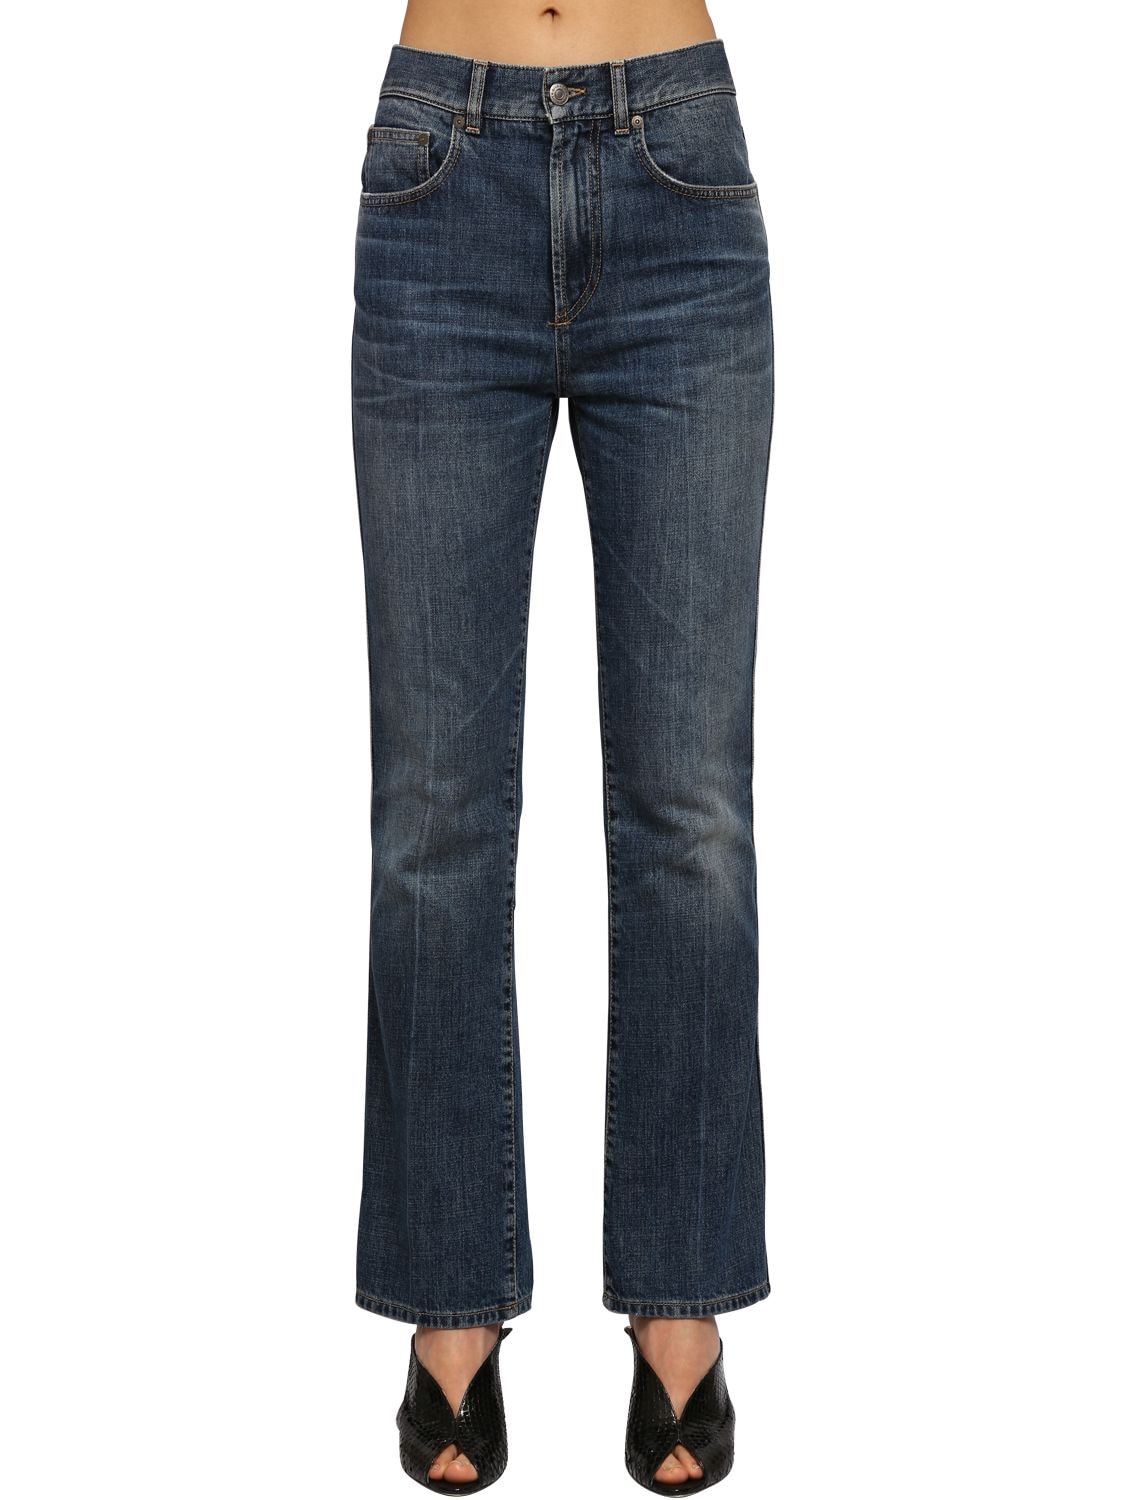 Givenchy Washed Cotton Denim Jeans